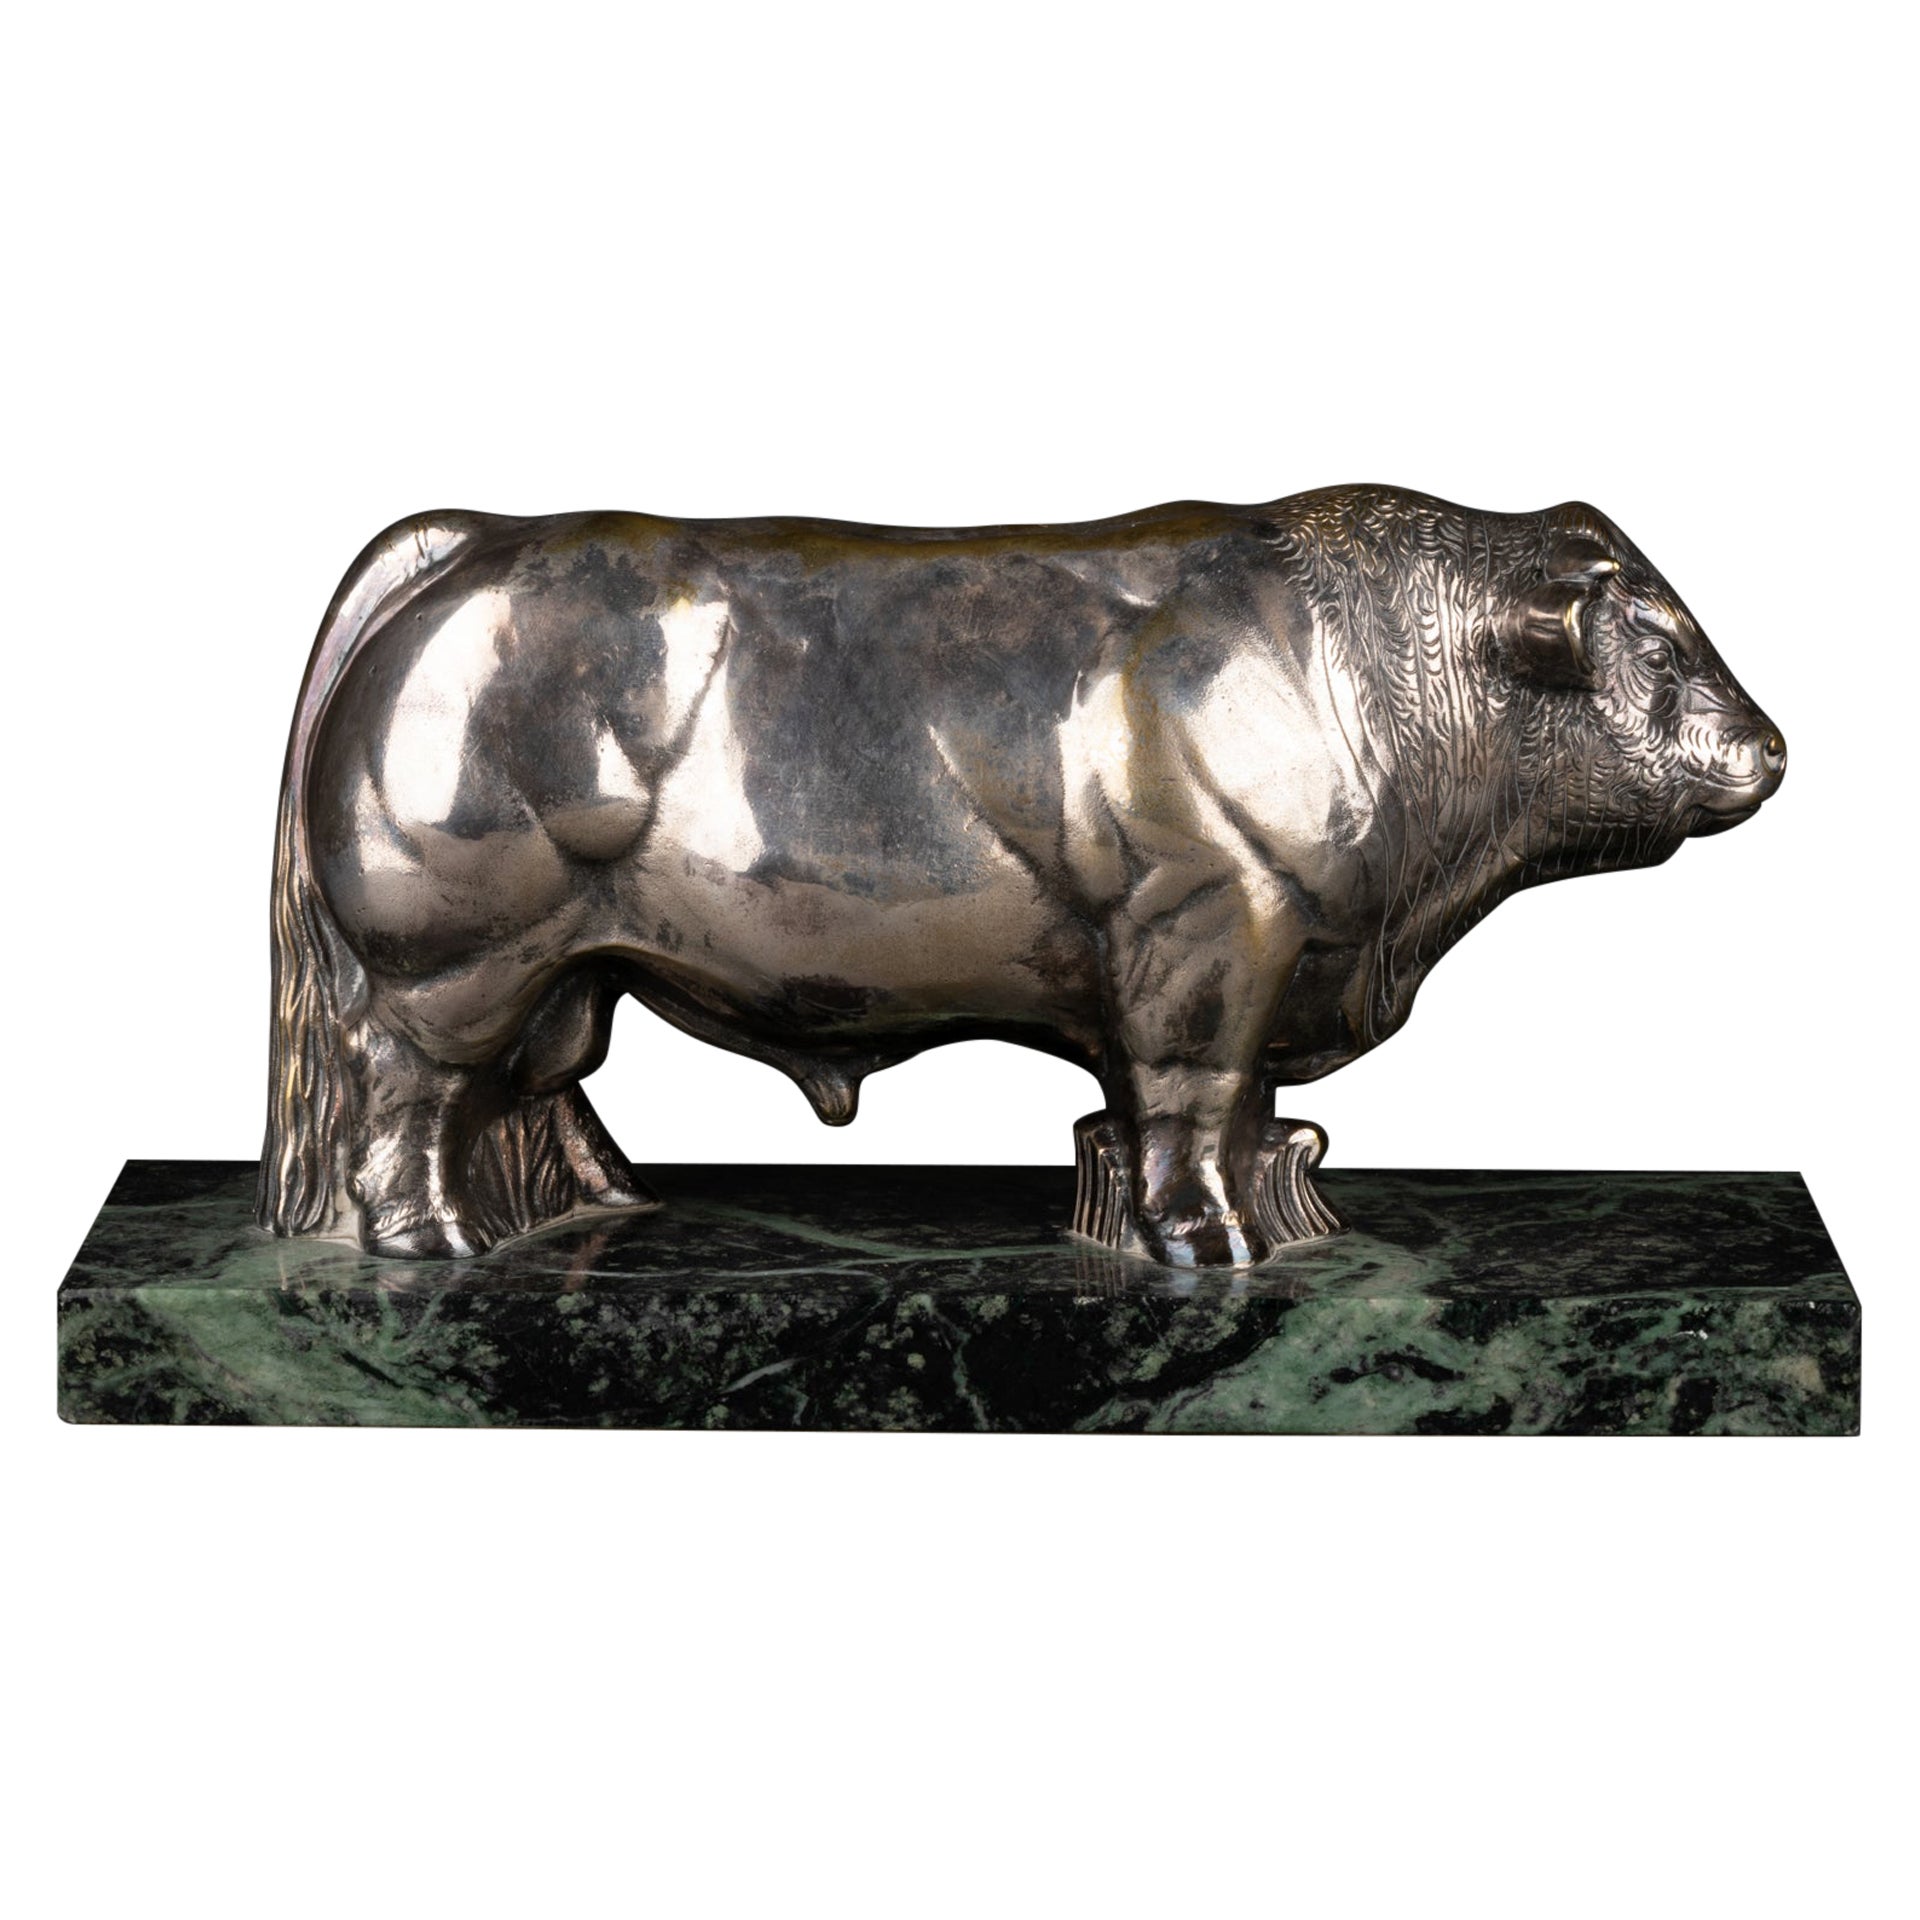 J.Laugerette (XXth c., France) : Silver plated bronze sculpture of a Bull For Sale